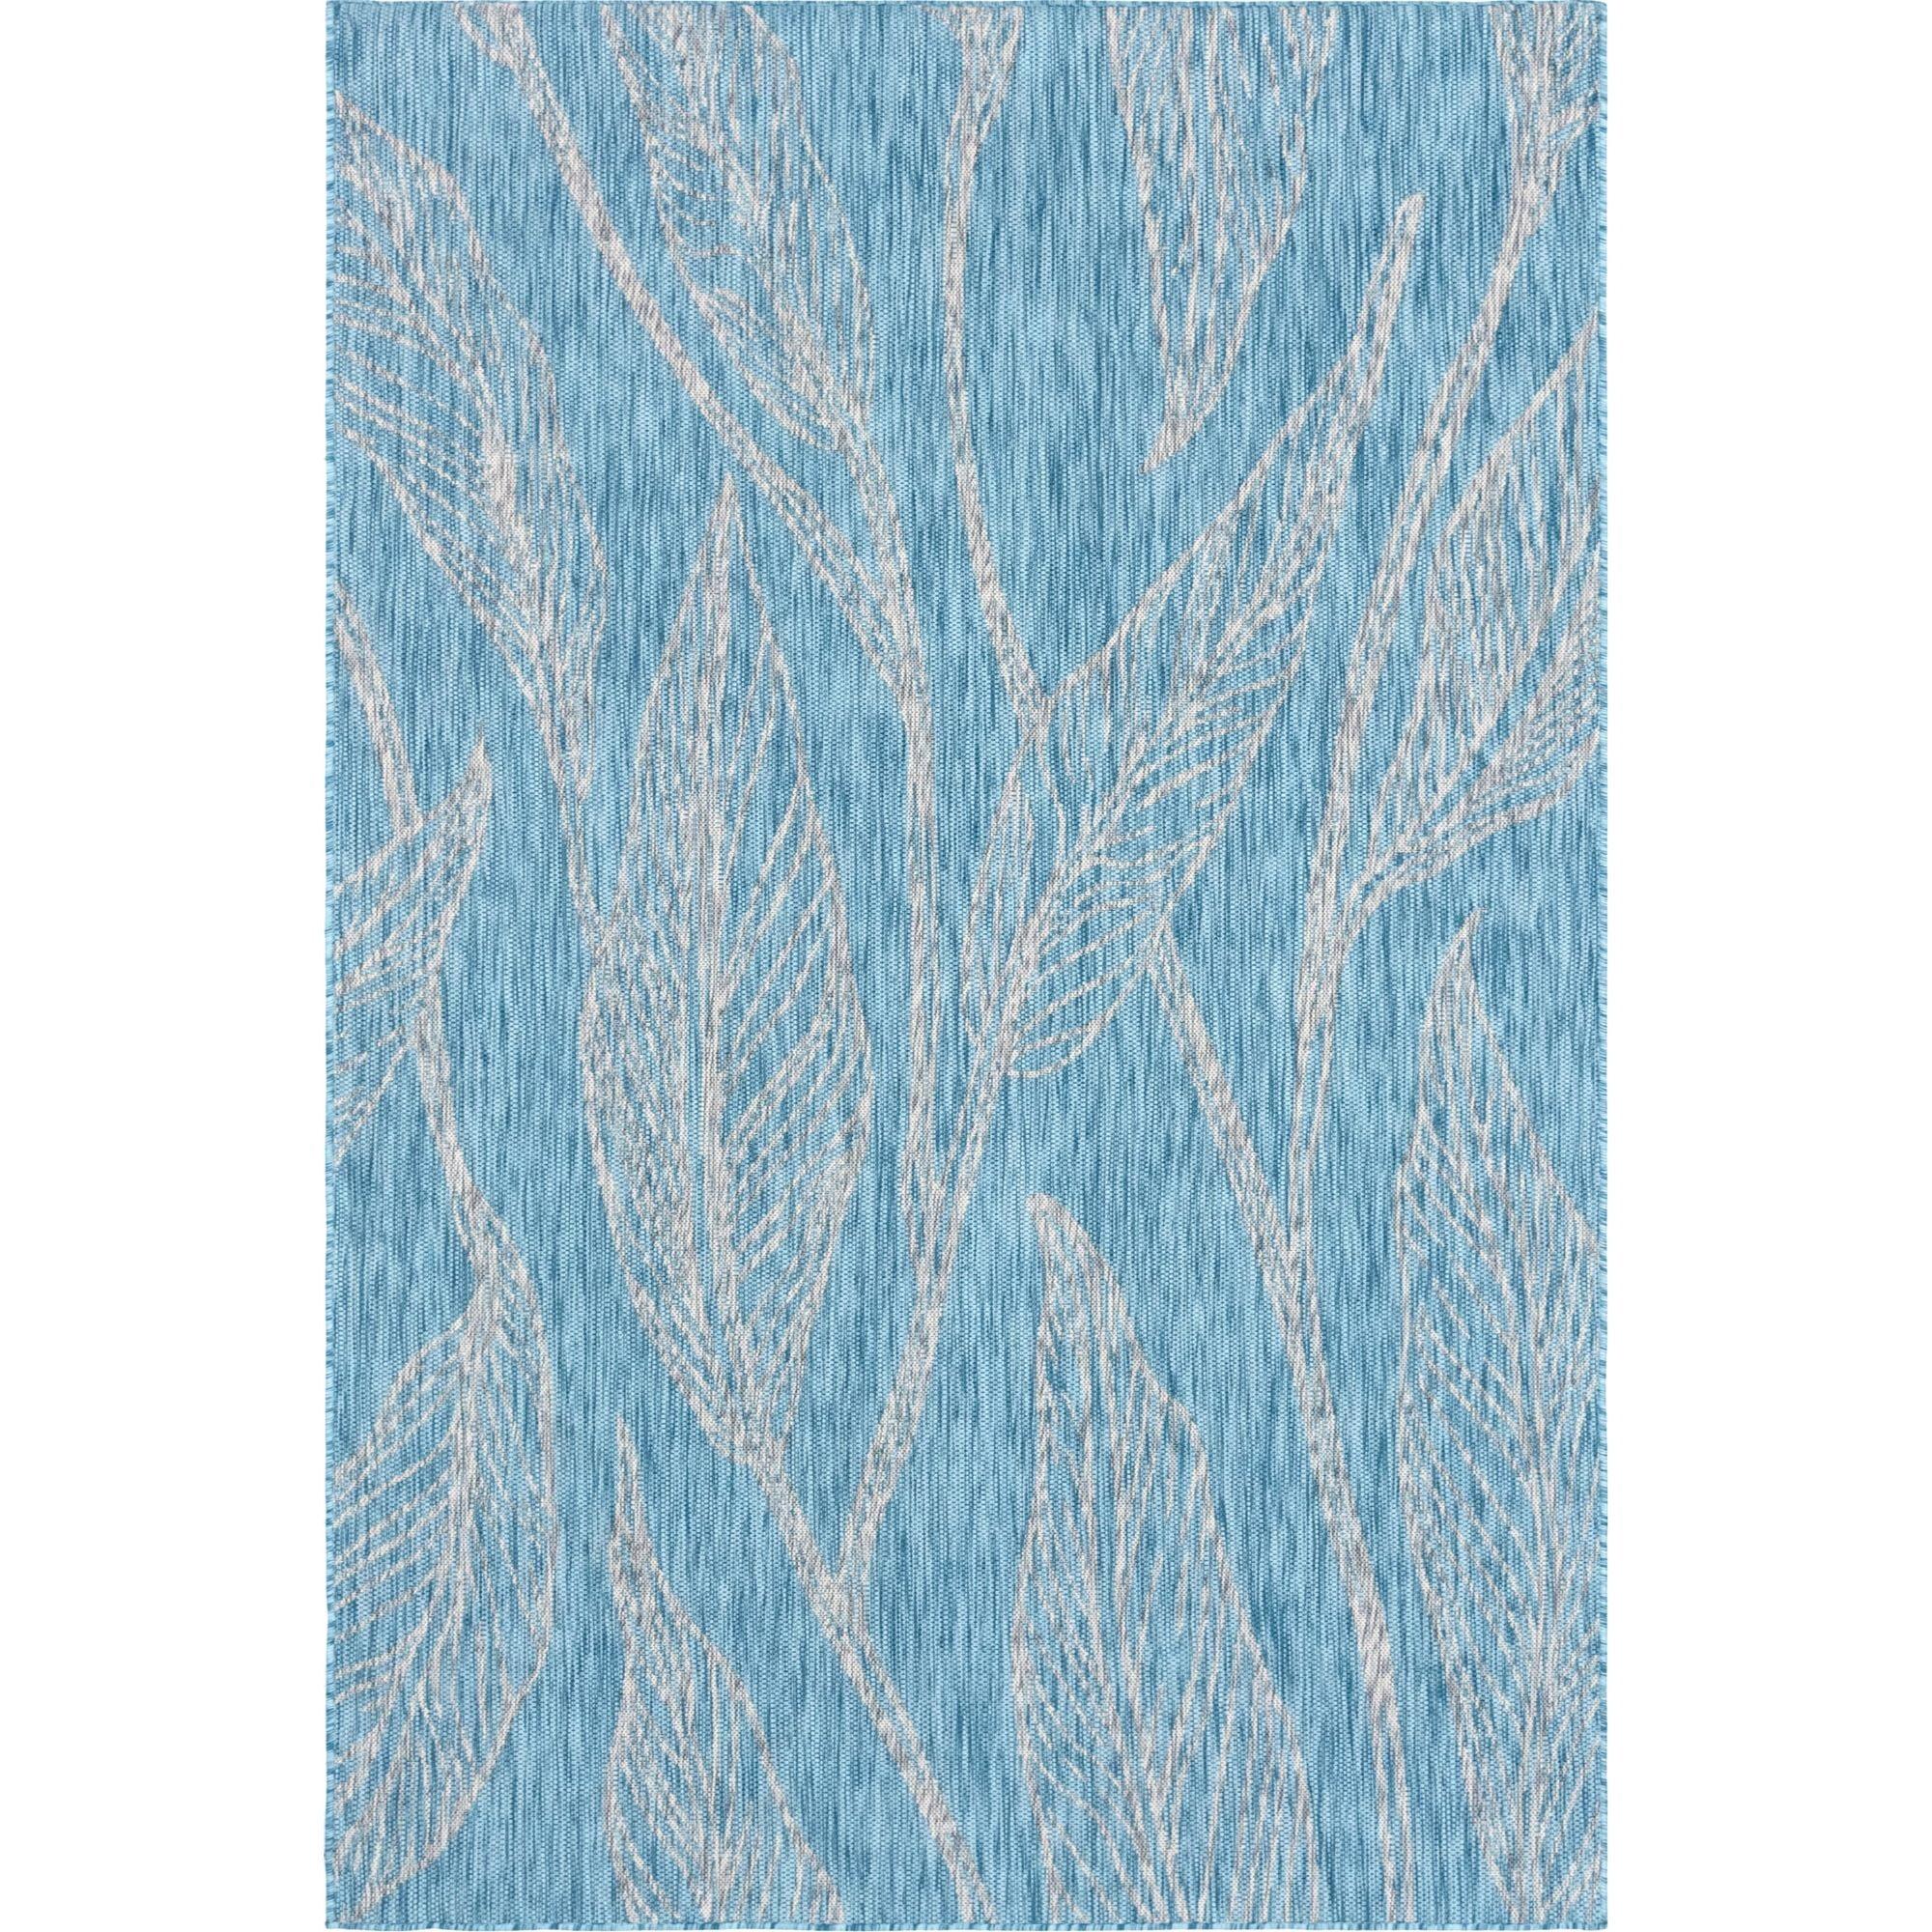 Aqua Blue Abstract 6' x 9' Easy-Care Synthetic Outdoor Rug